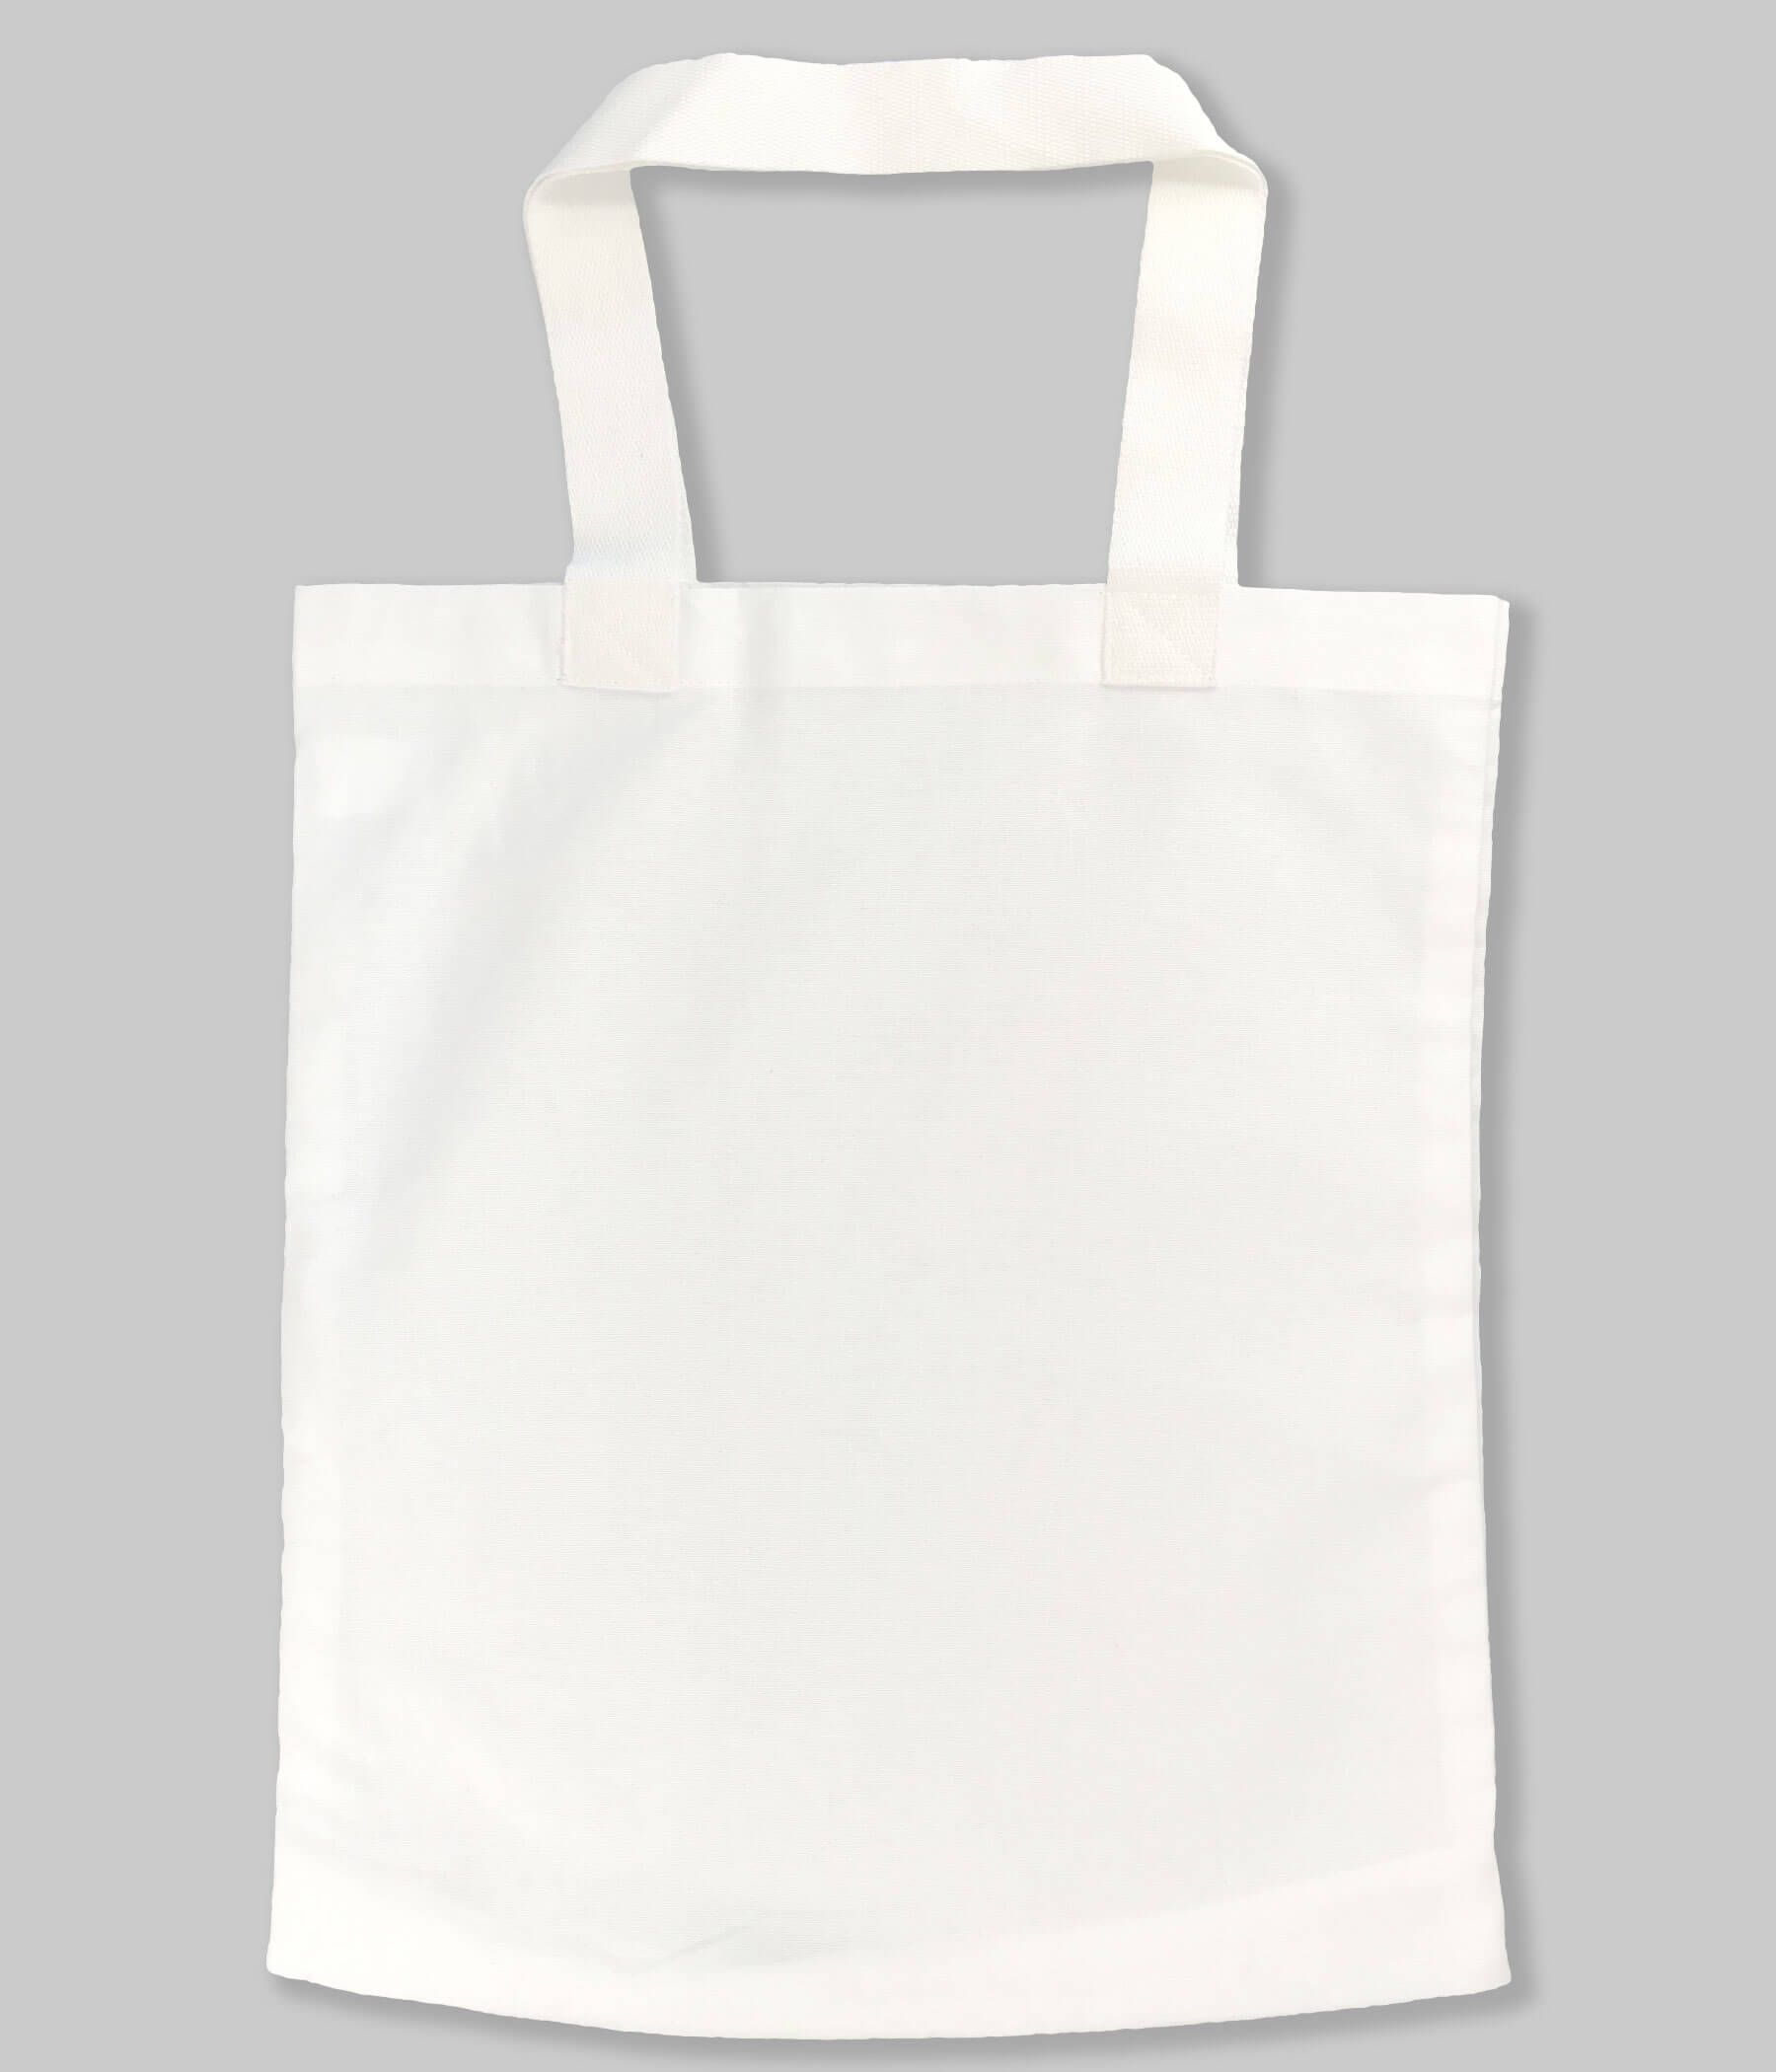 Buy Continuous Lines Off White Tote Bag| Canvas| Fashion| Eco Friendly|  Shoulder Bag| for Gym Beach Shopping College| The Art People| at Amazon.in